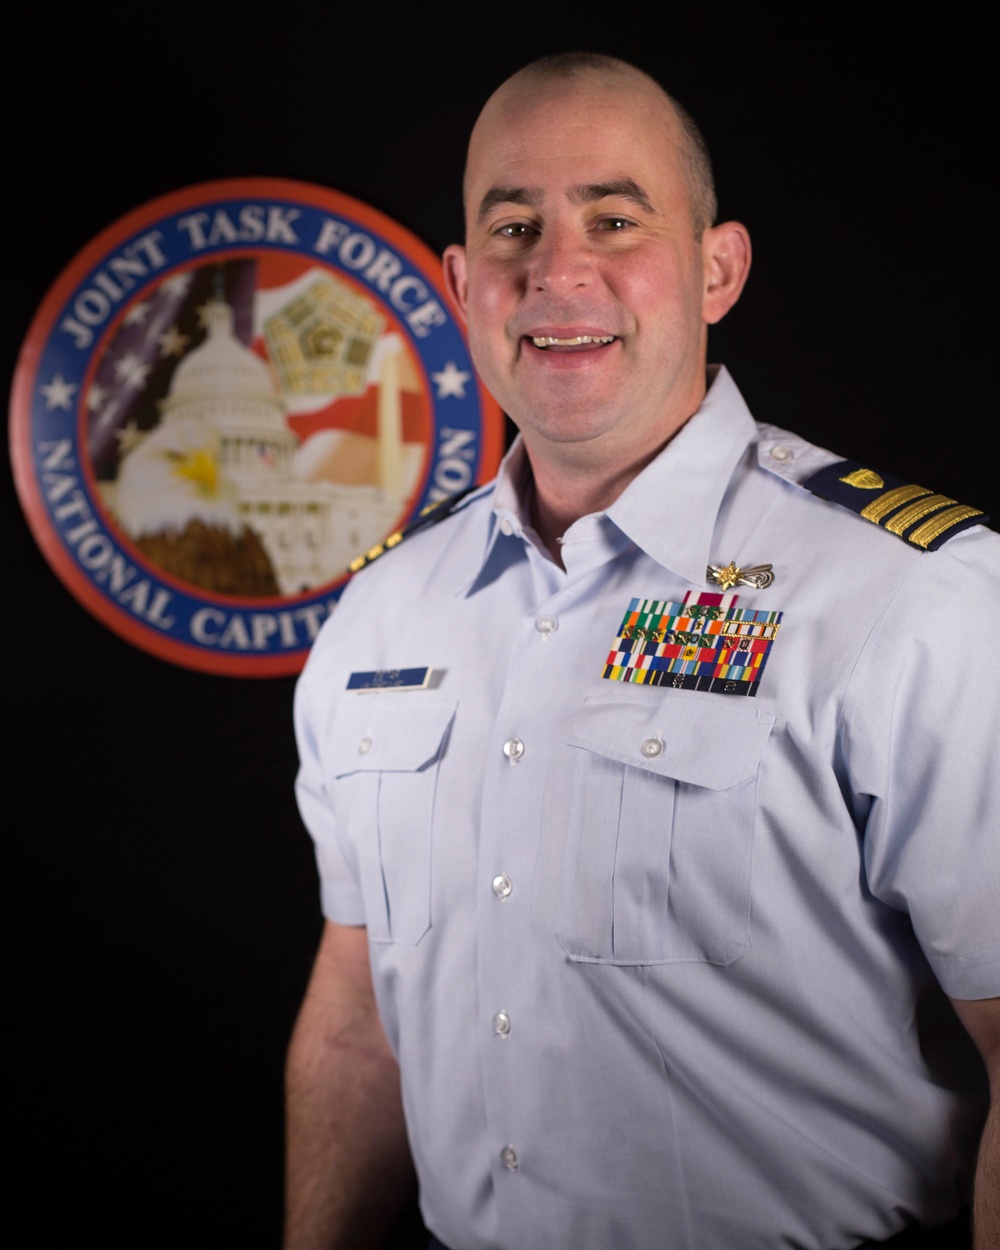 Coast Guard Capt. DeTar supports the 58th Presidential Inauguration